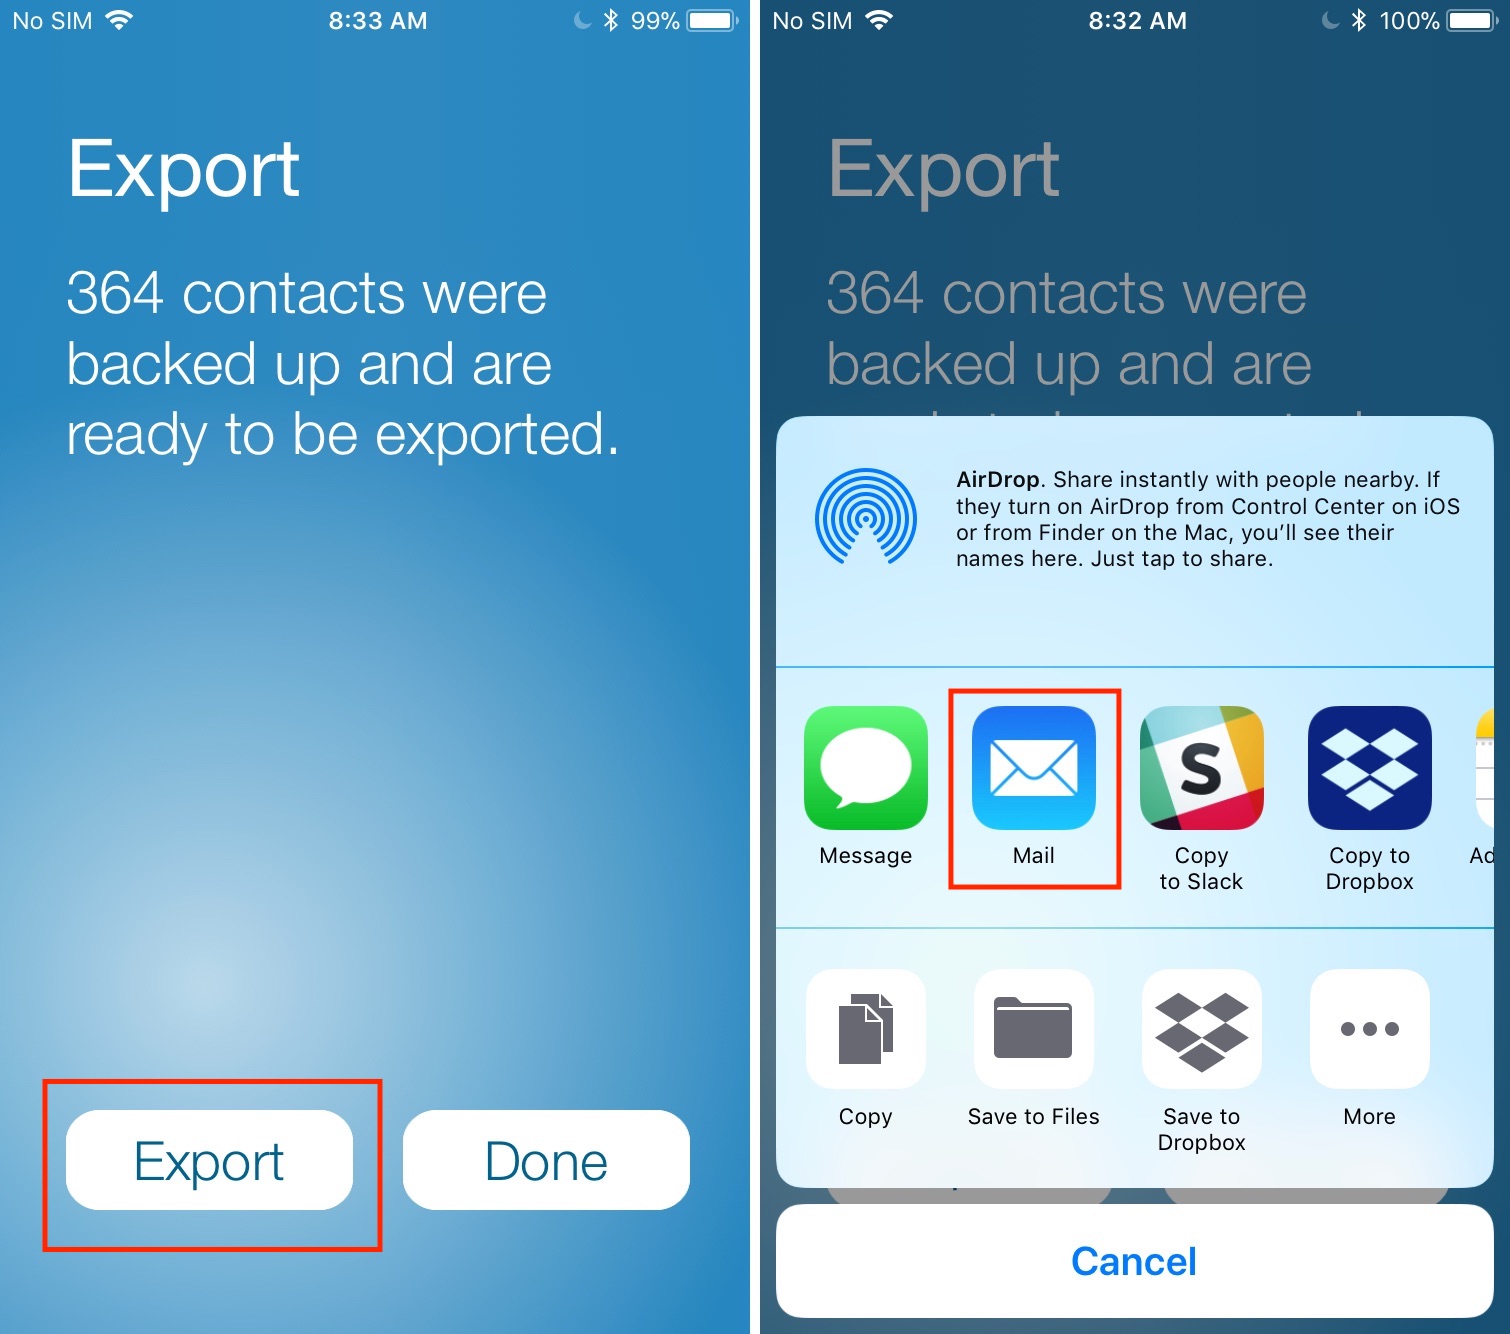 Export your contacts by email